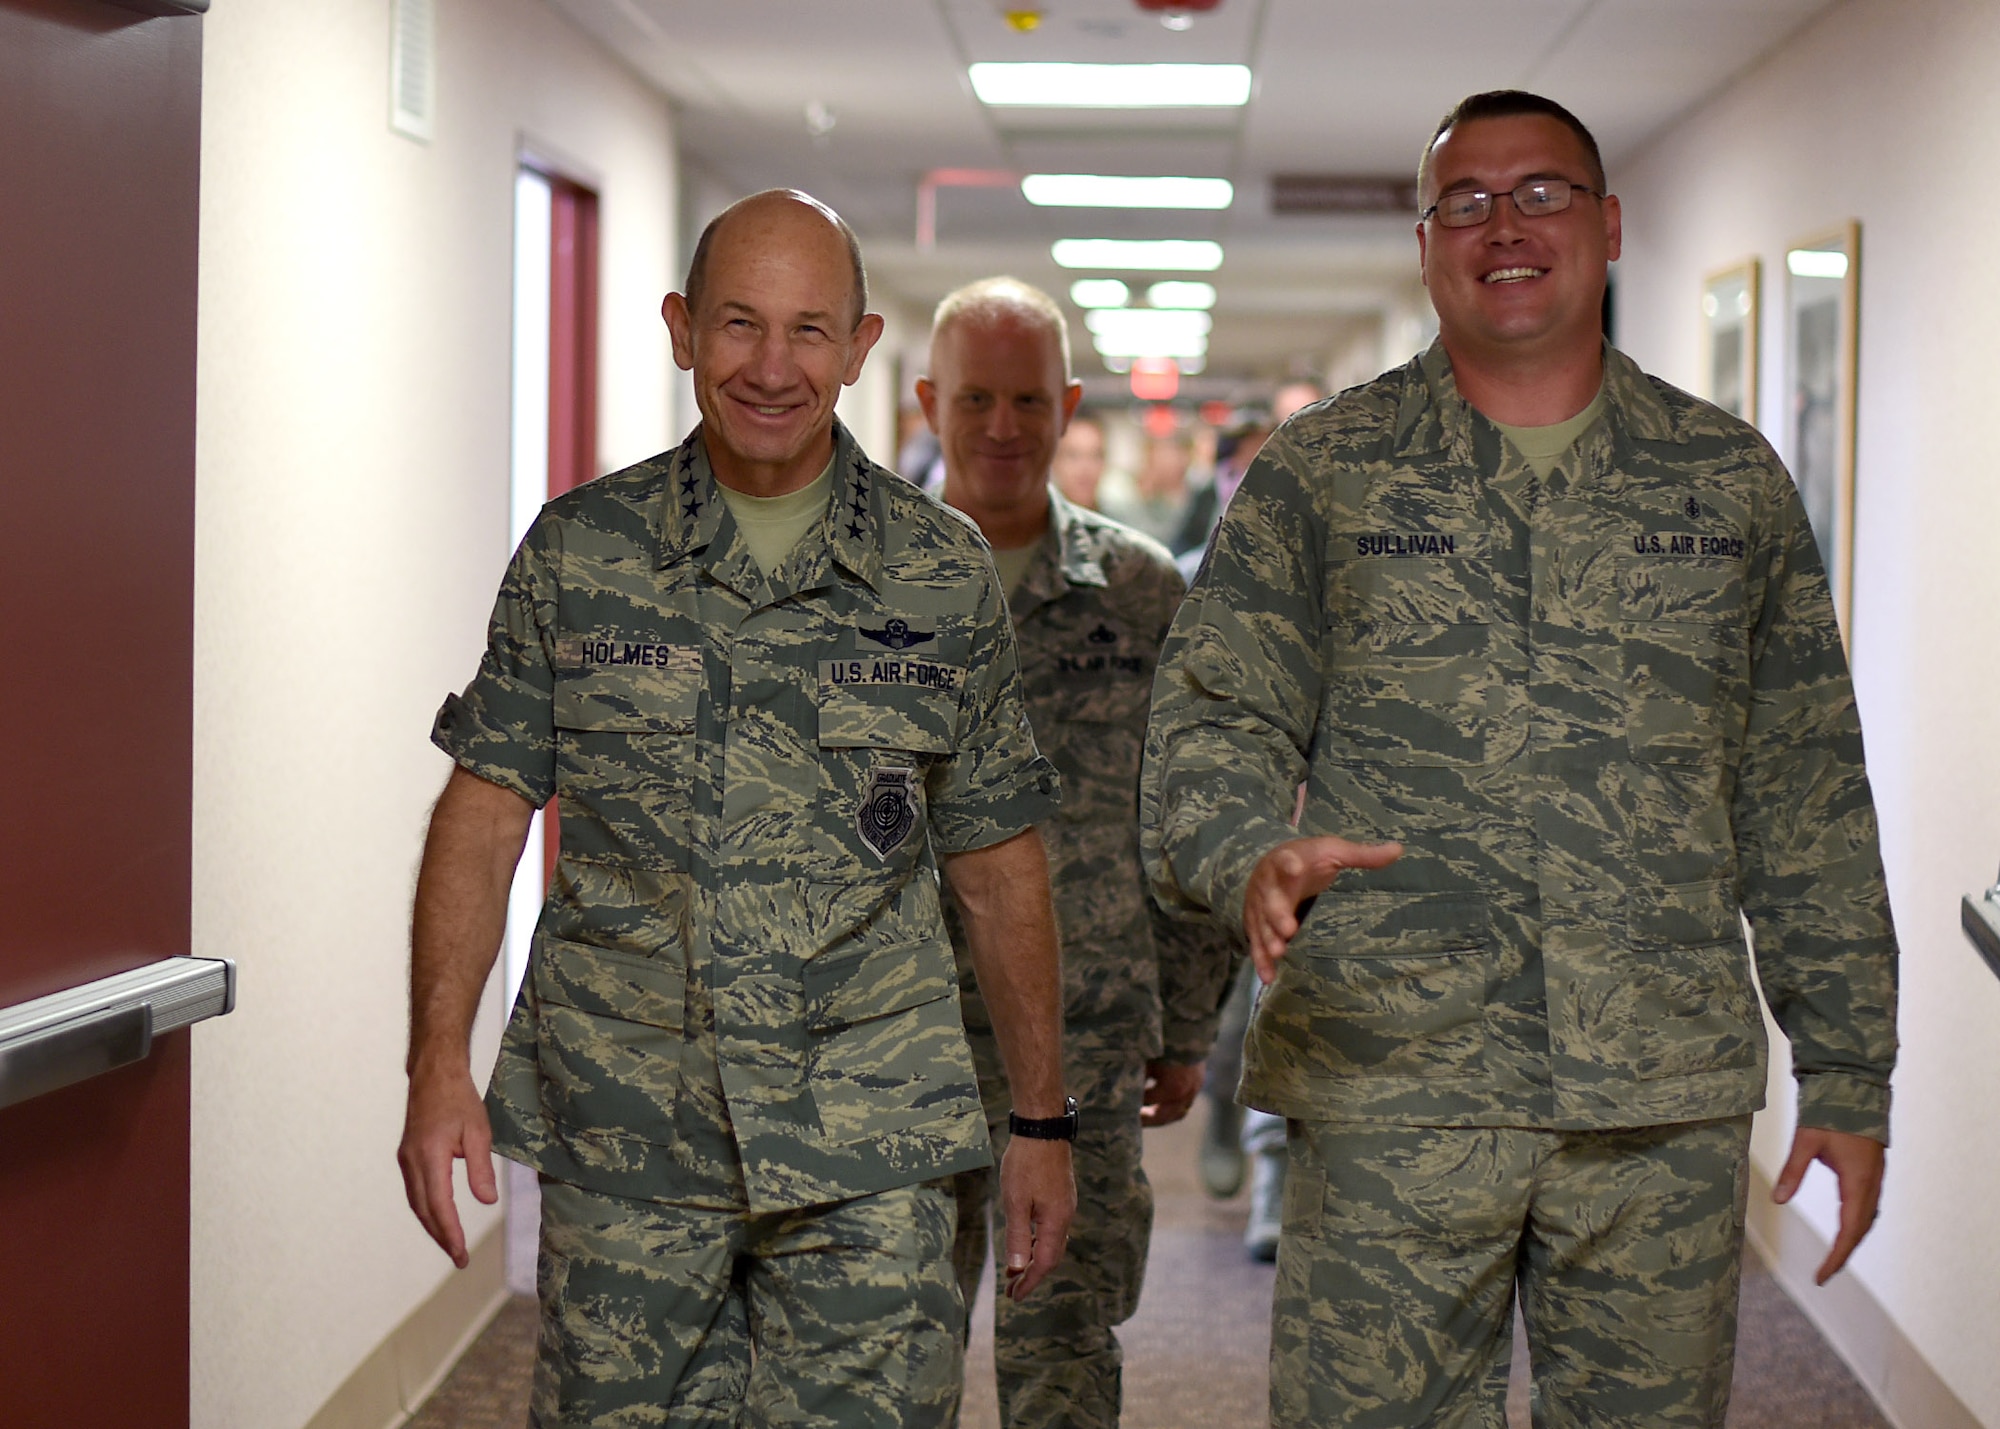 Tech. Sgt. Thomas Sullivan, 319th Medical Support Squadron laboratory NCO-in-charge, escorts Gen. Mike Holmes, Air Combat Command commander, during a tour of the 319th Medical Group June 15, 2017, on Grand Forks AFB, N.D. Holmes spent the day getting to know how the “Warriors of the North” meet the mission. (U.S. Air Force photo by Senior Airman Ryan Sparks)